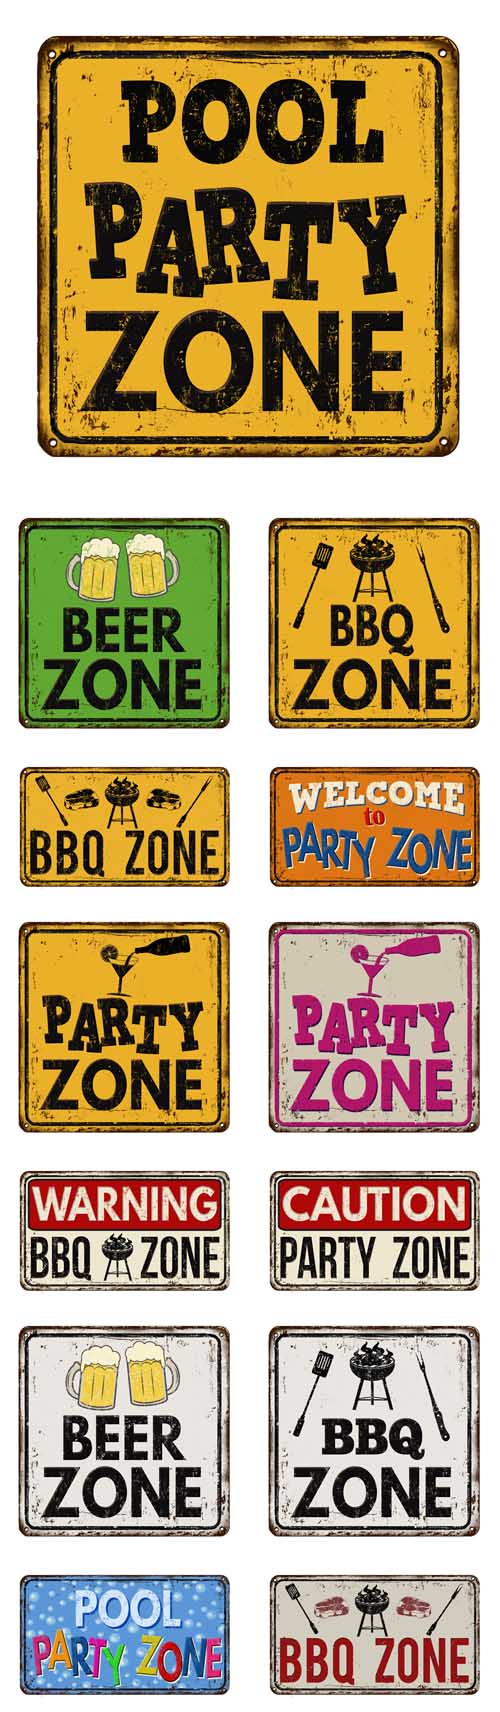 Vectors - Party and BBQ Zone Vintage Rusty Metal Signs